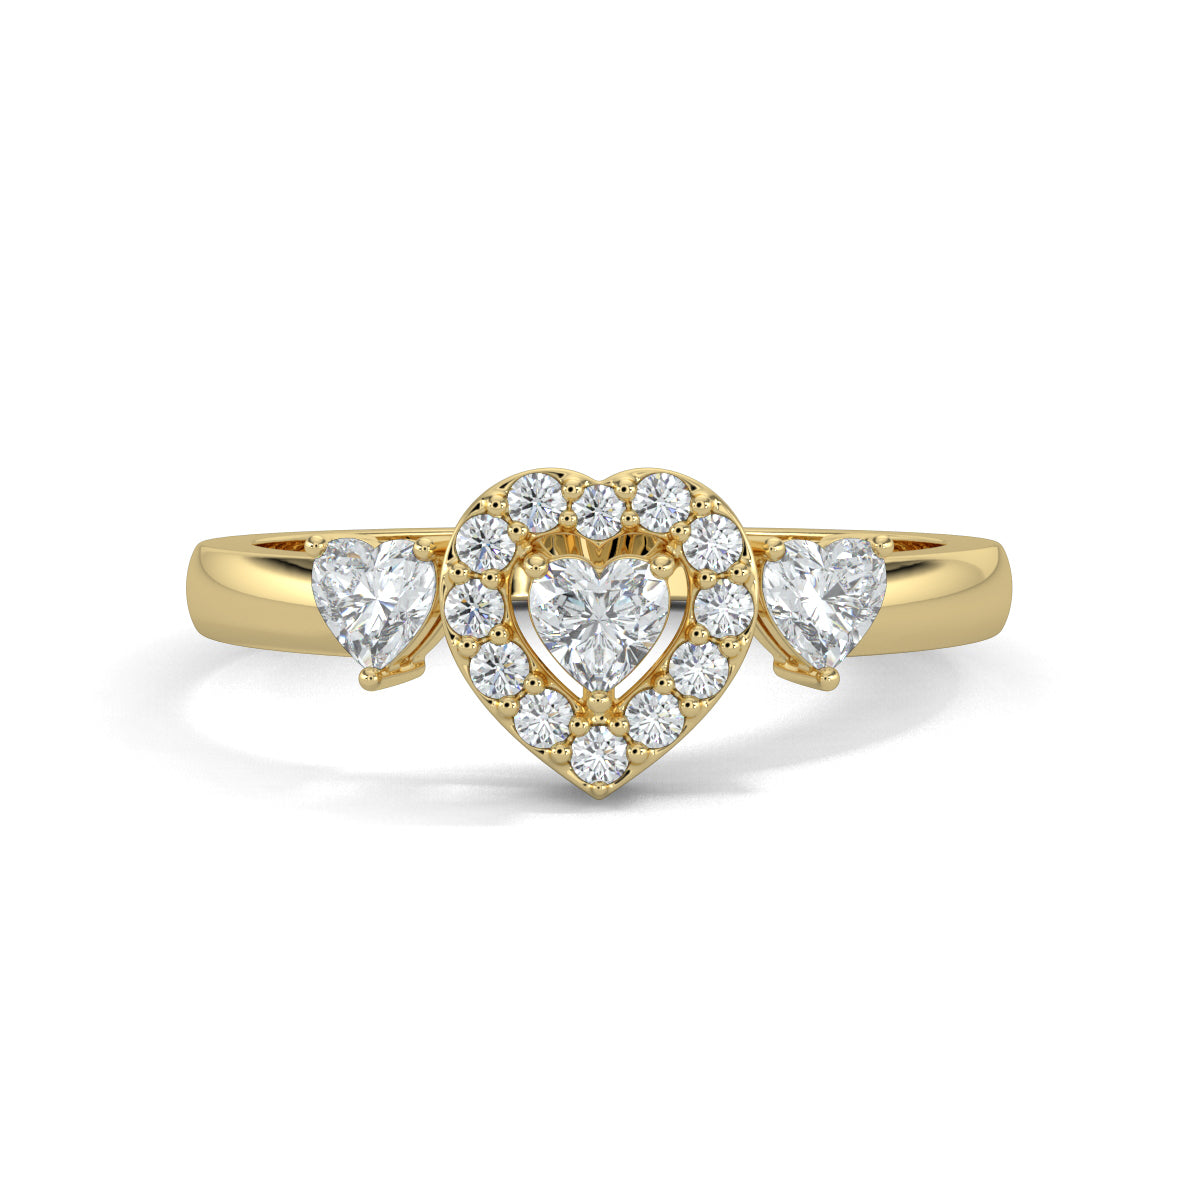 Yellow Gold, Diamond Ring, Romantic heart solitaire ring, natural diamond ring, lab-grown diamond ring, heart-shaped diamond, halo setting, sustainable jewelry, love diamond accents, ethically sourced diamonds